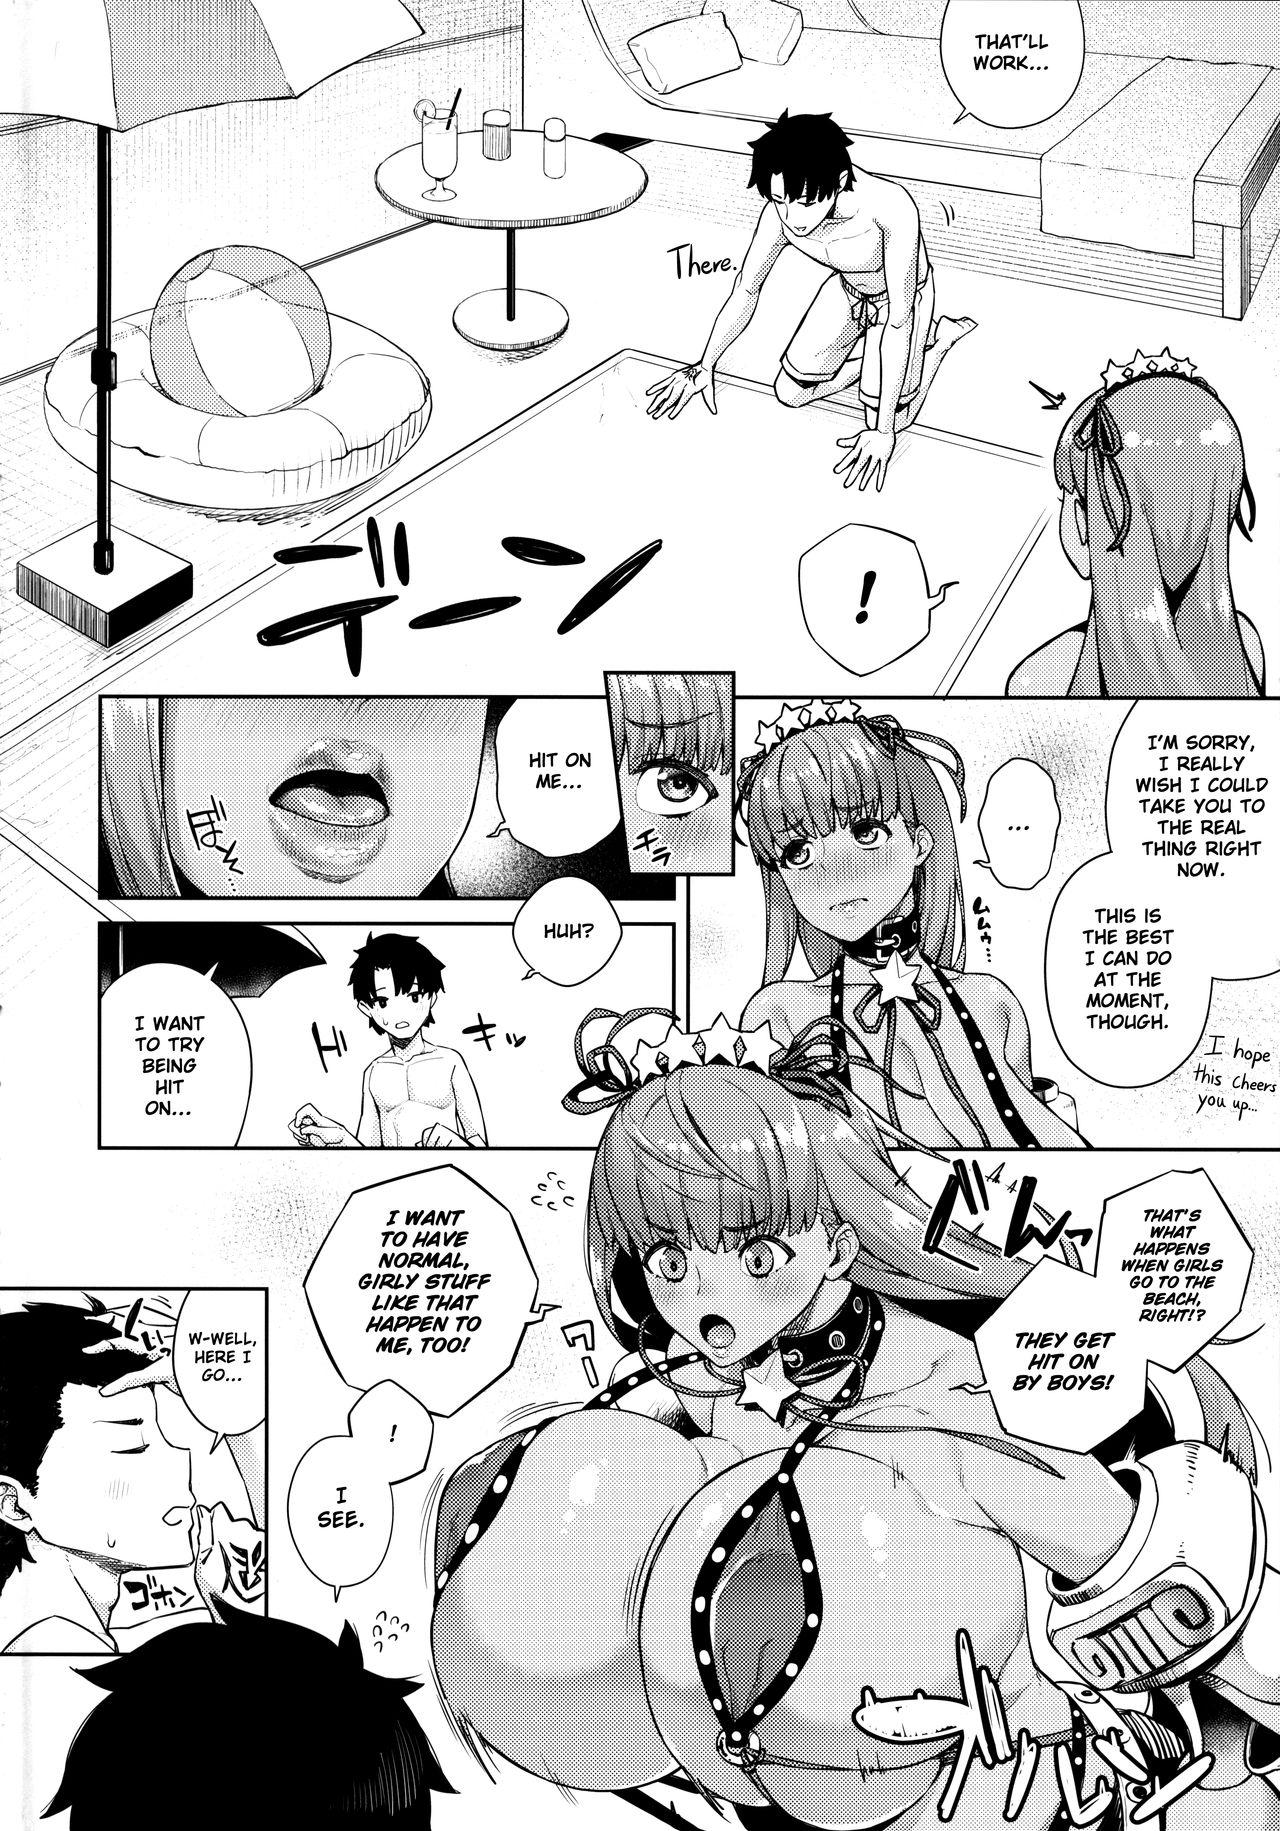 Clothed Sex Kyokou no Umibe nite | at the fictional seaside - Fate grand order Perverted - Page 4